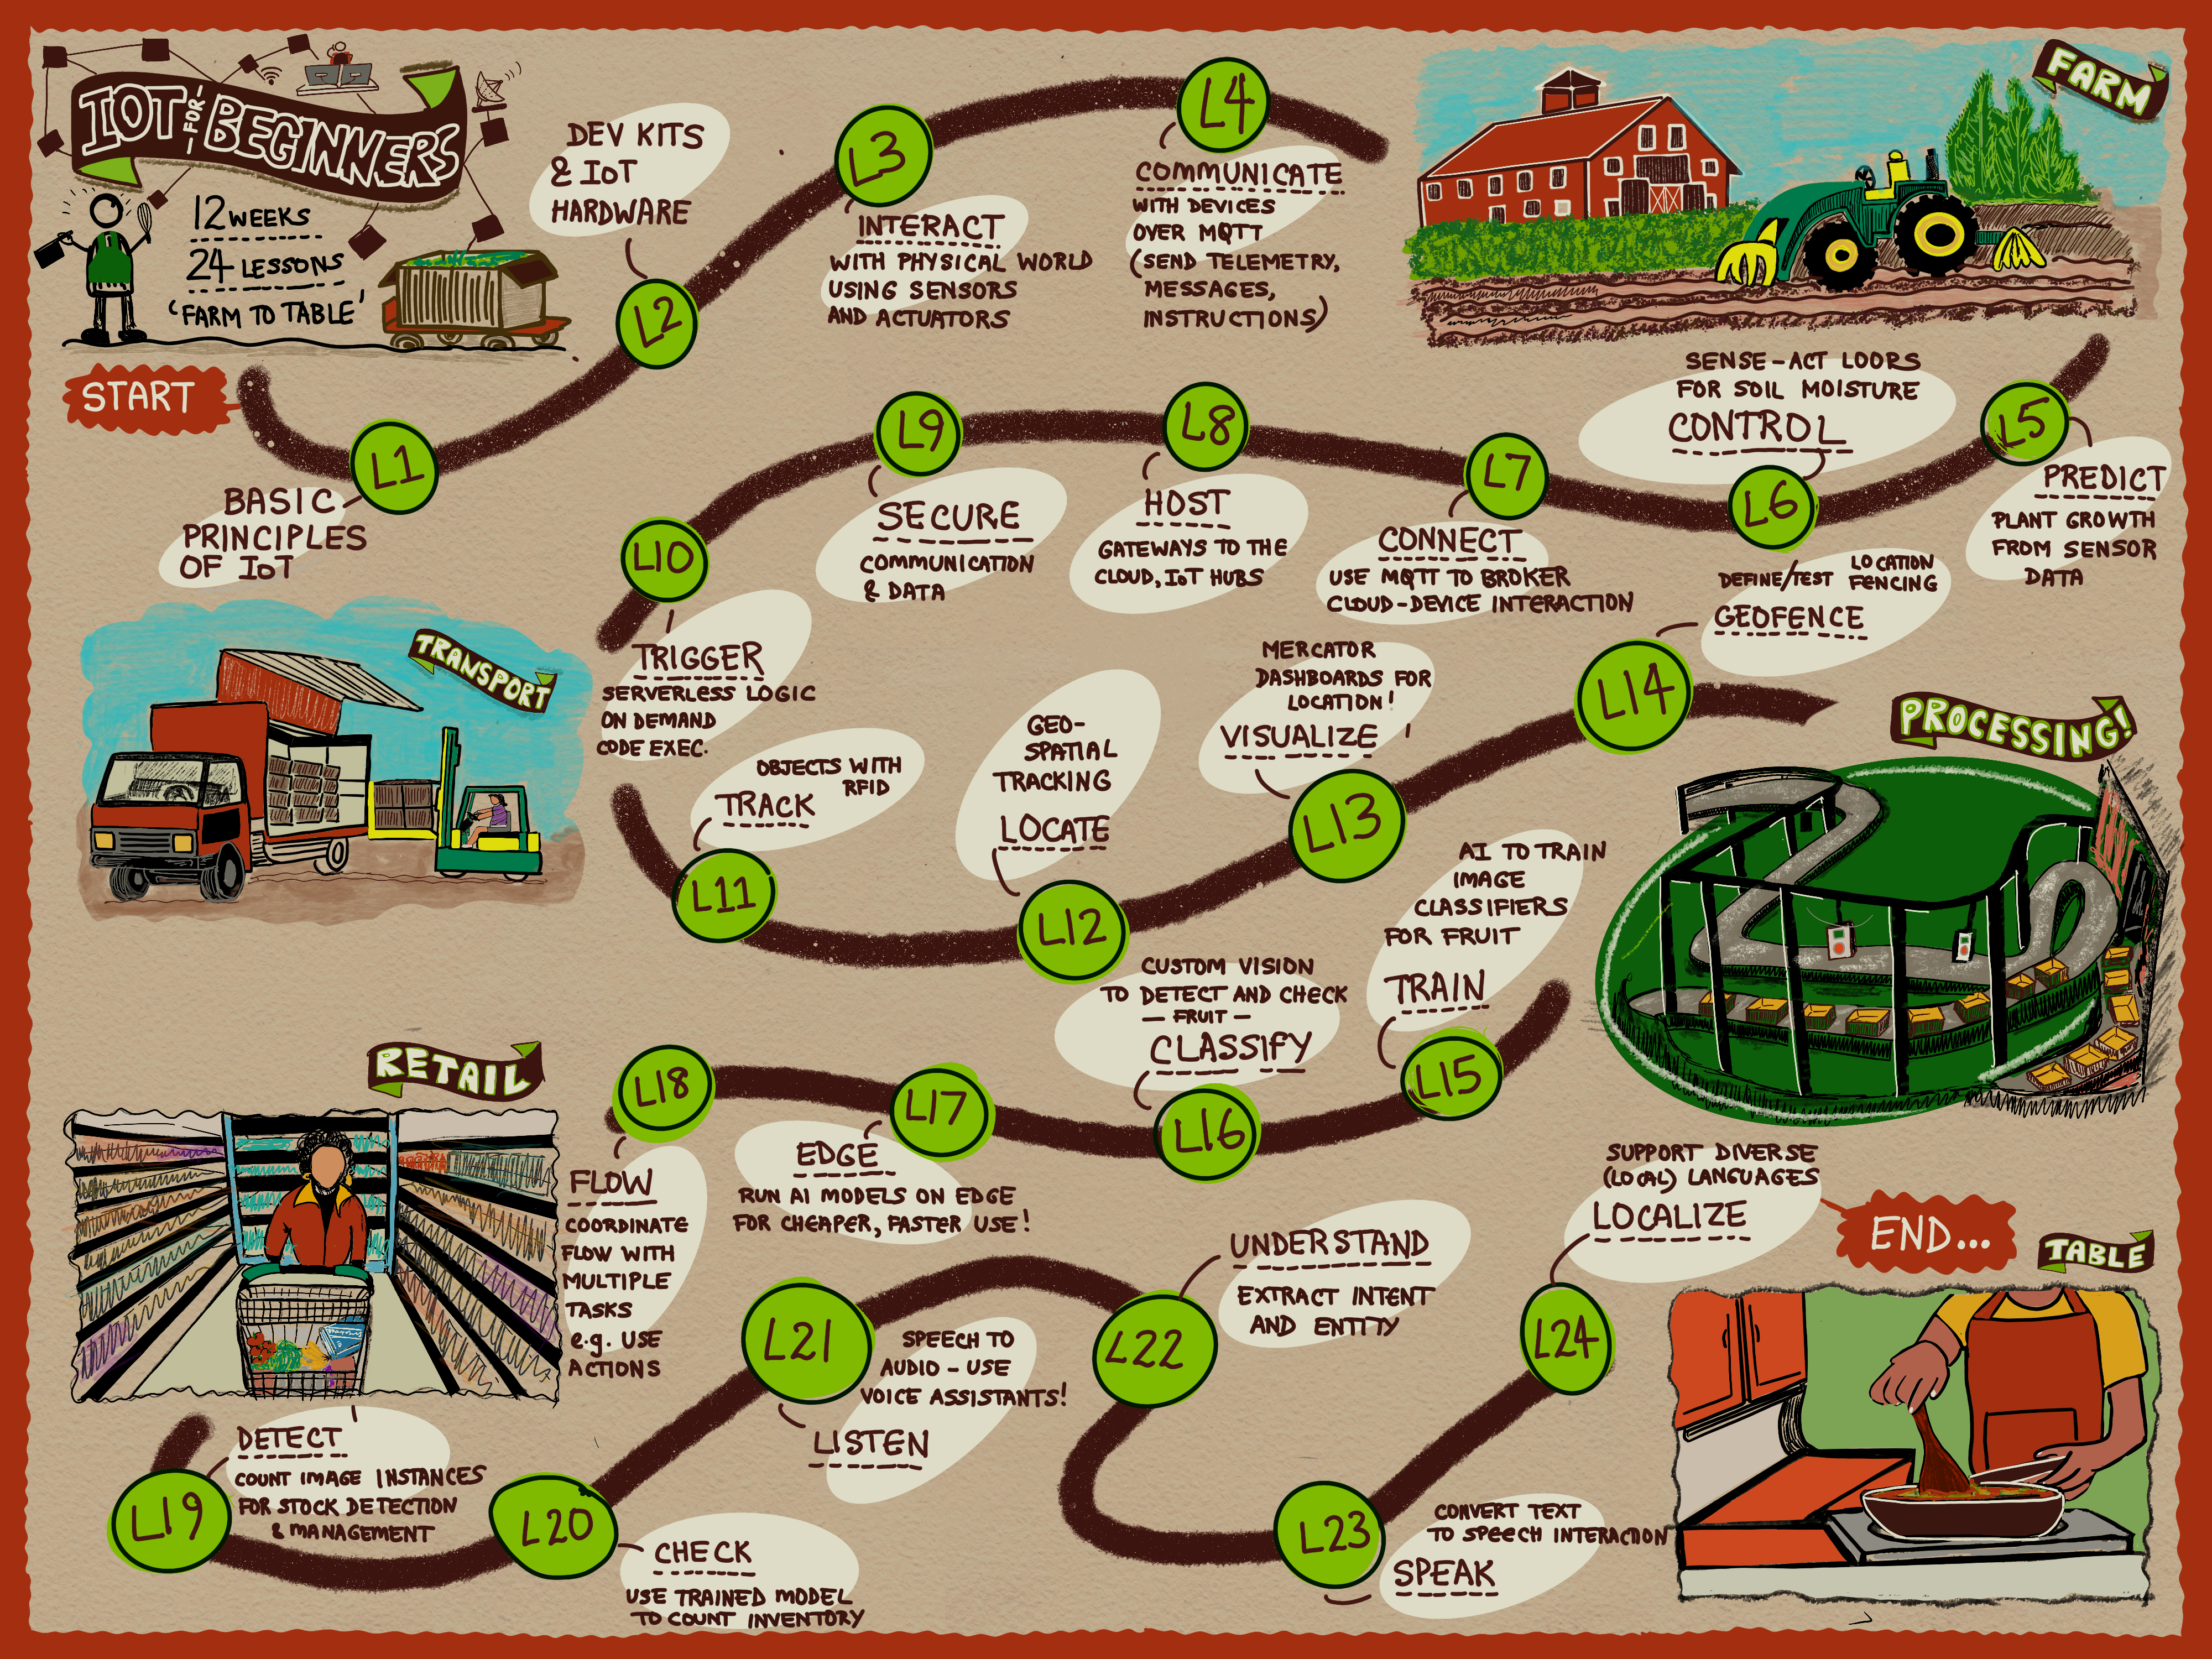 A road map for the course showing 24 lessons covering intro, farming, transport, processing, retail and cooking